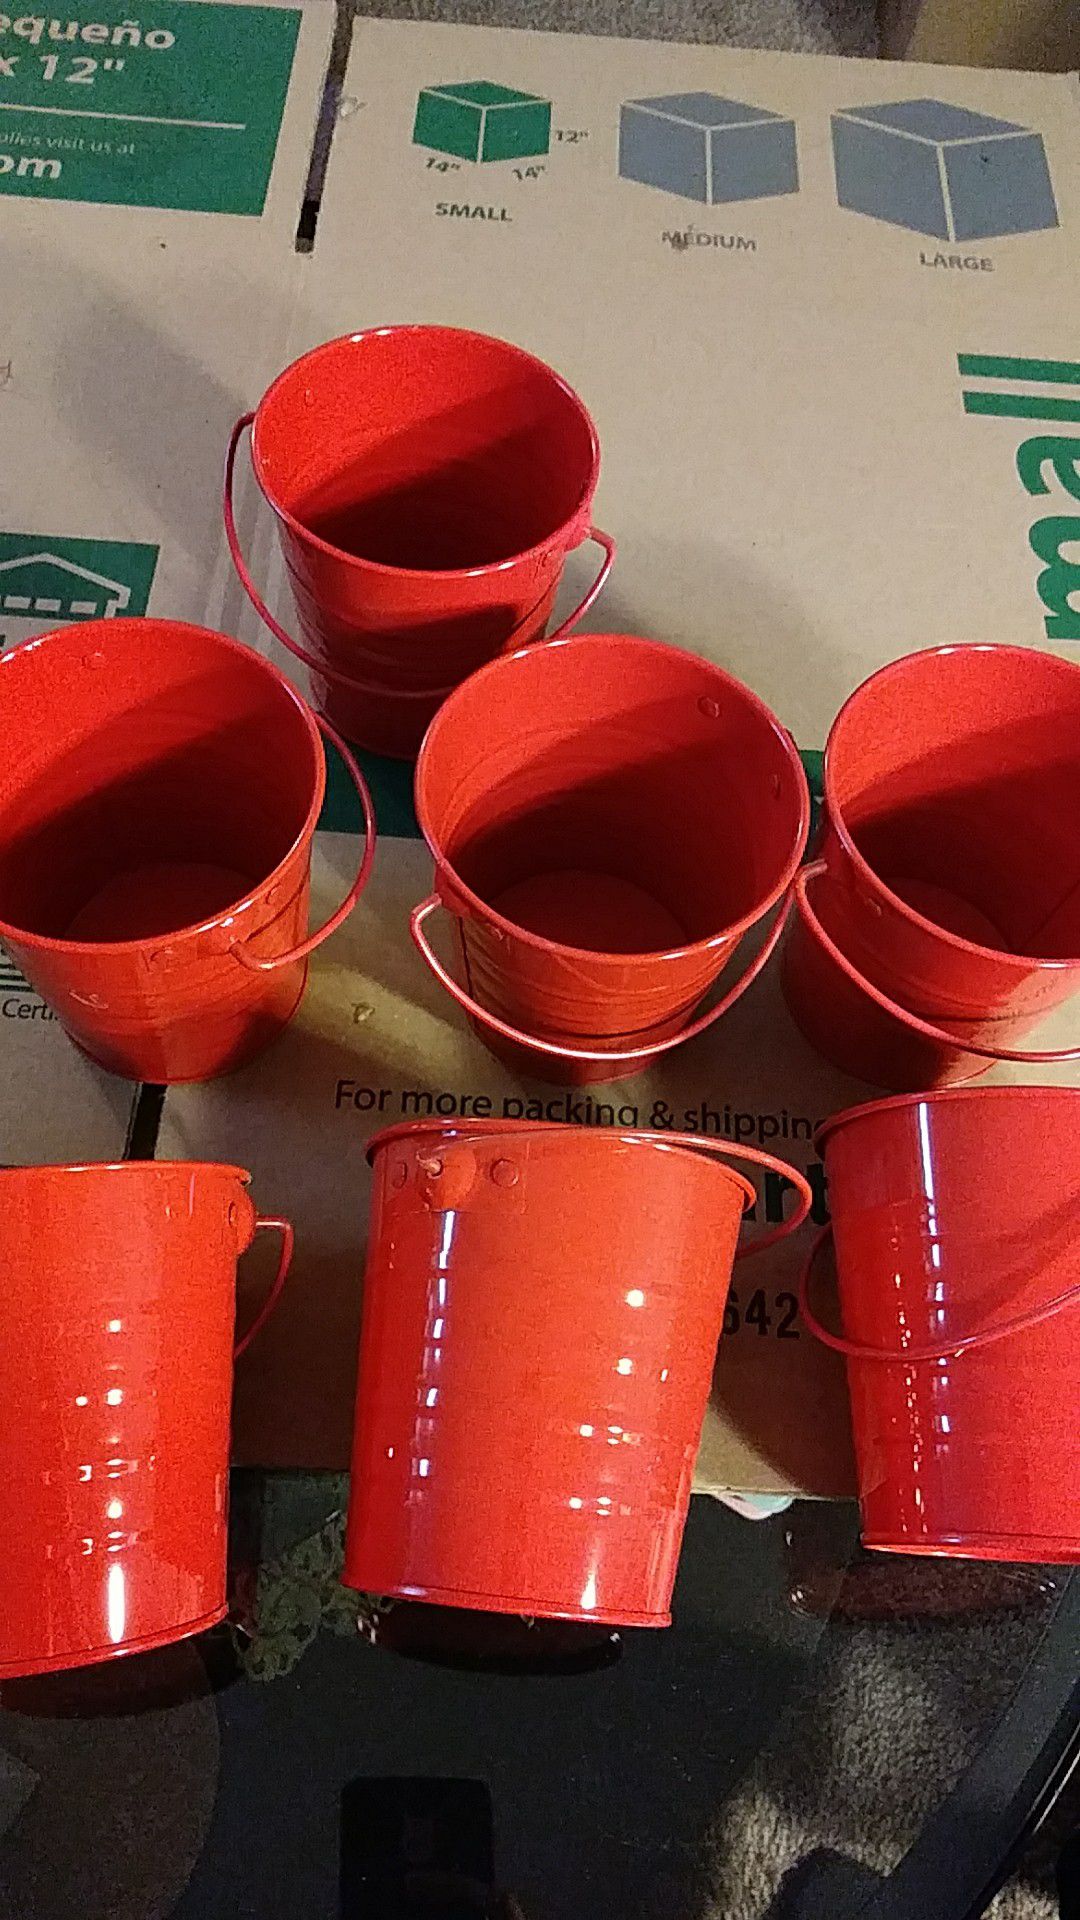 7 small red buckets